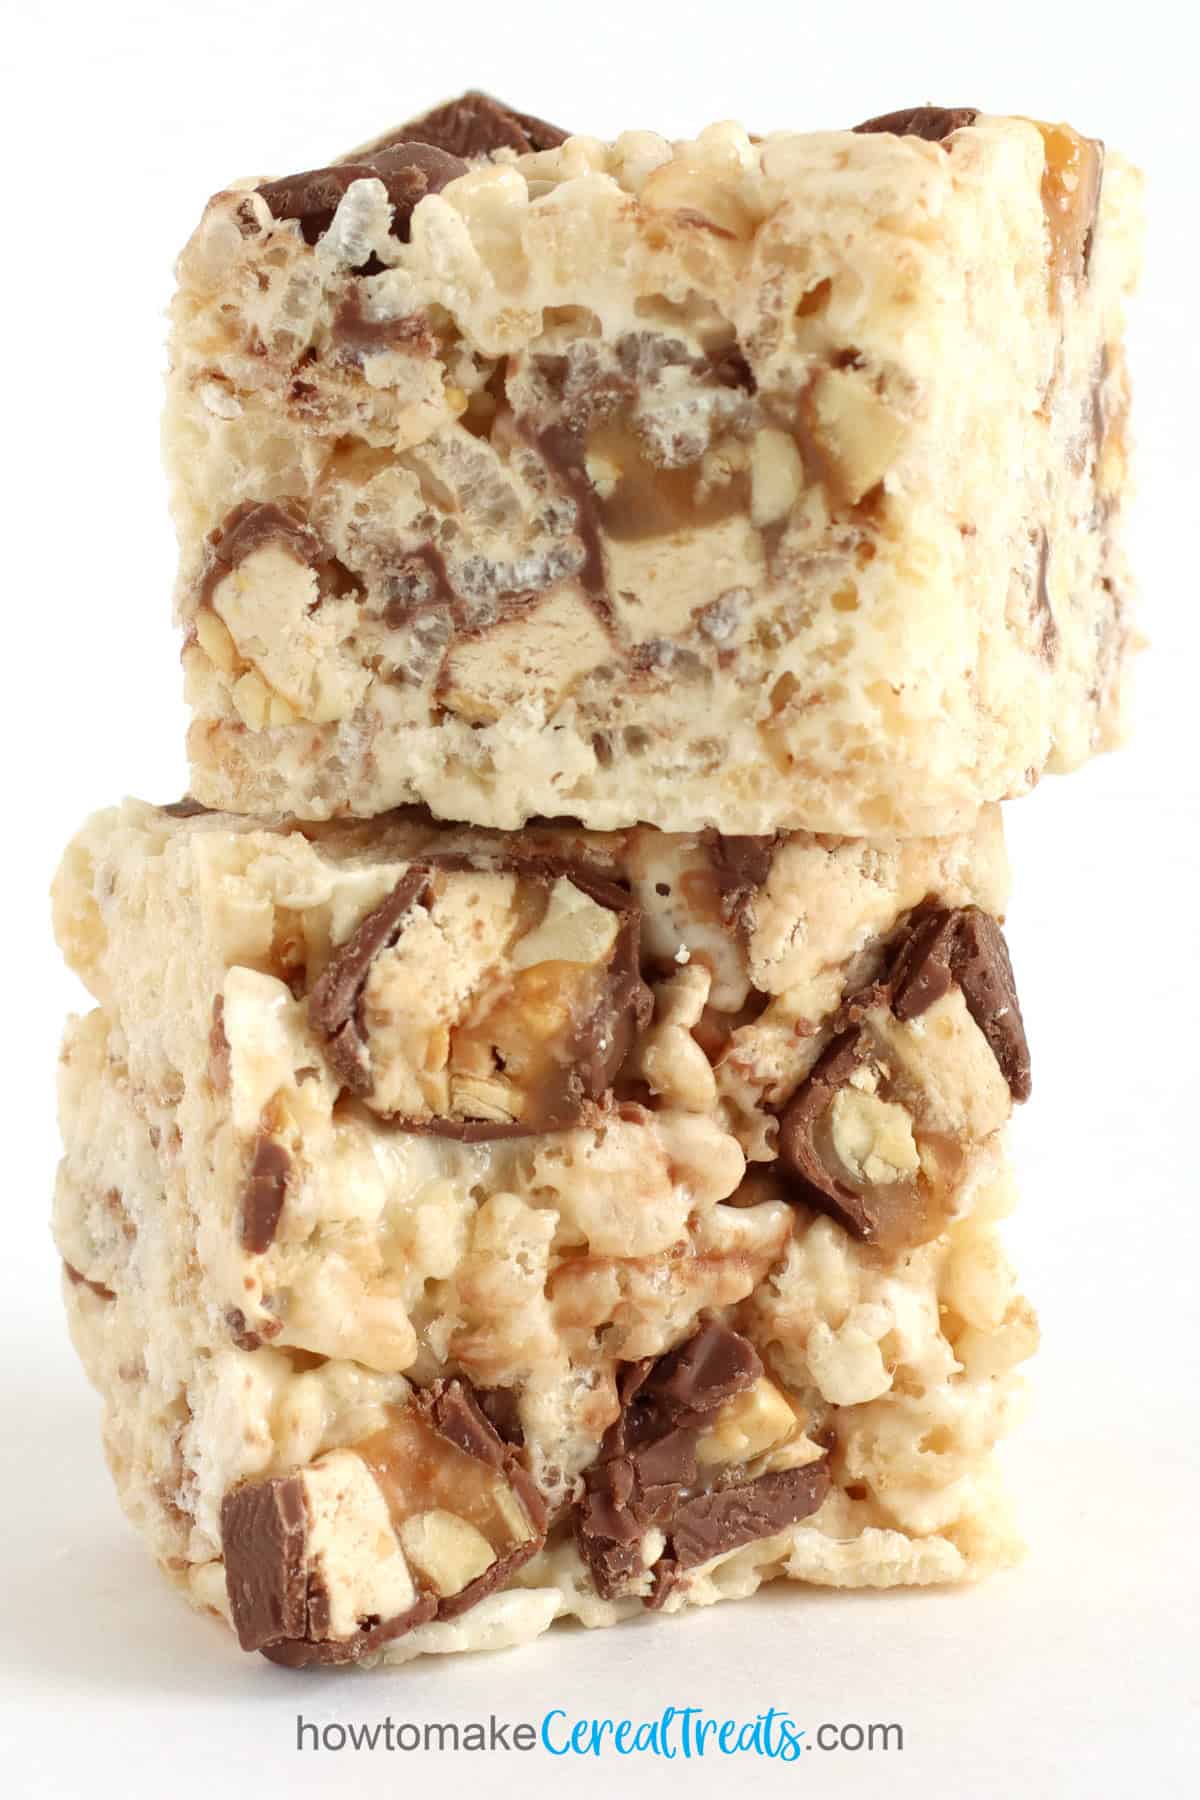 Rice Krispie Treats loaded with pieces of Snickers candy bars.